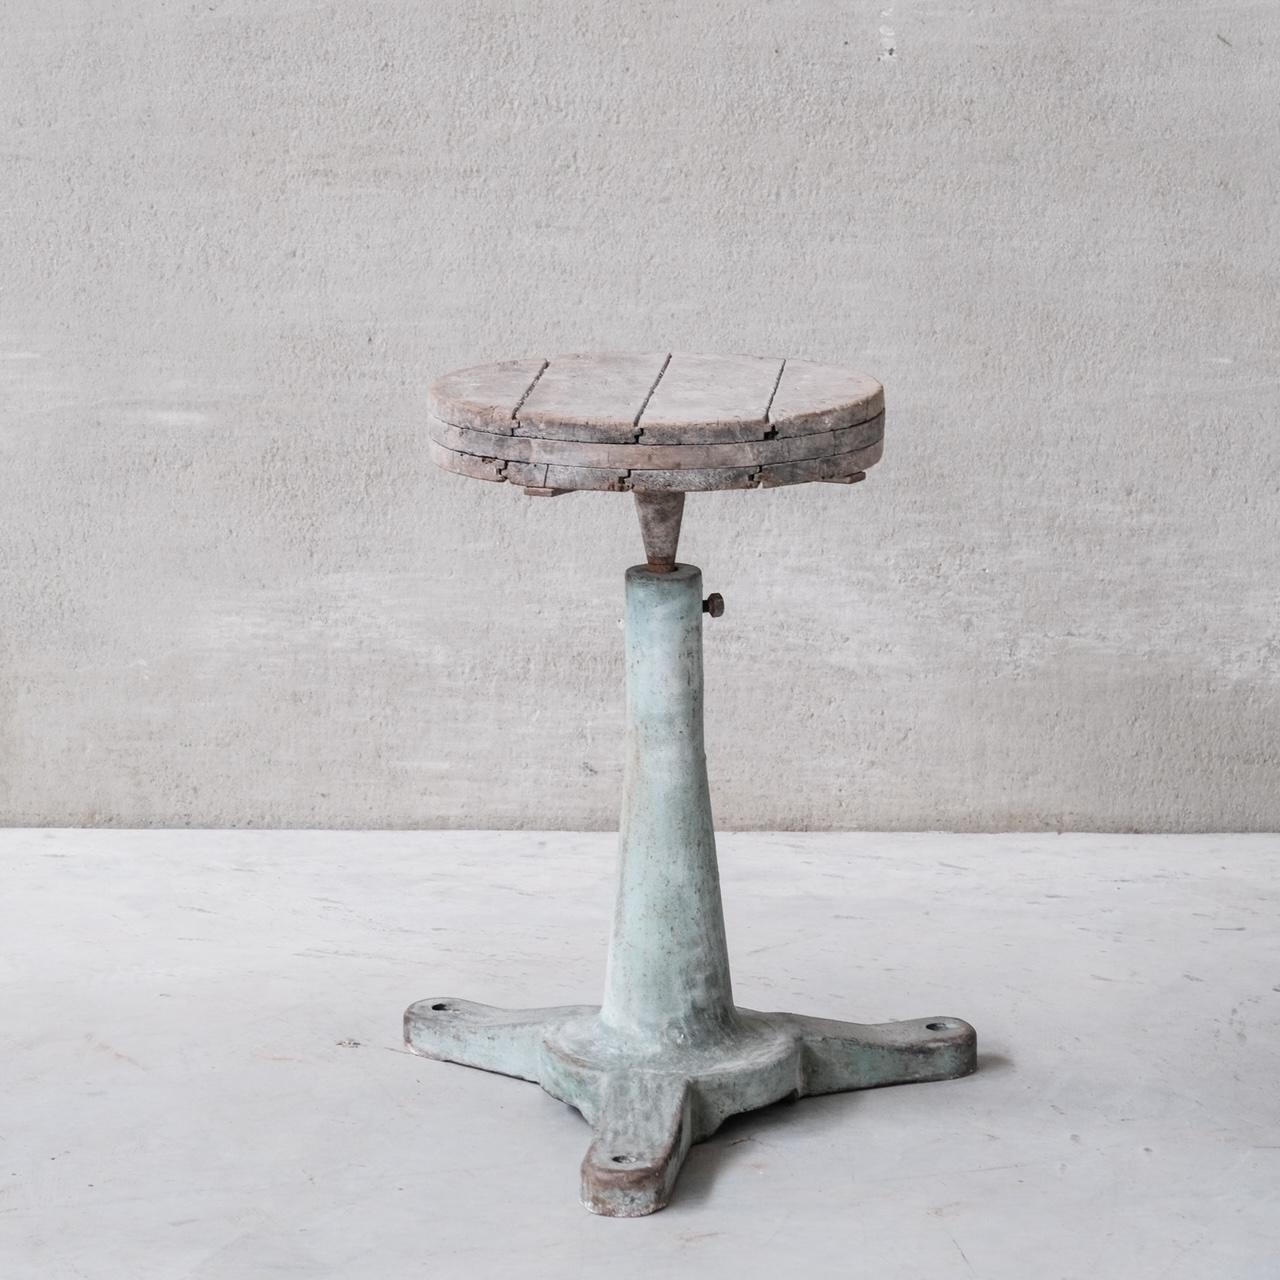 A heavy duty industrial rotating stand. 

Ideal as a sculpture or art stand. 

England, c1930s. 

By repute from the Royal Doulton Factory. 

One of two available at the time of listing. The other being sold via a separate listing. 

Location: